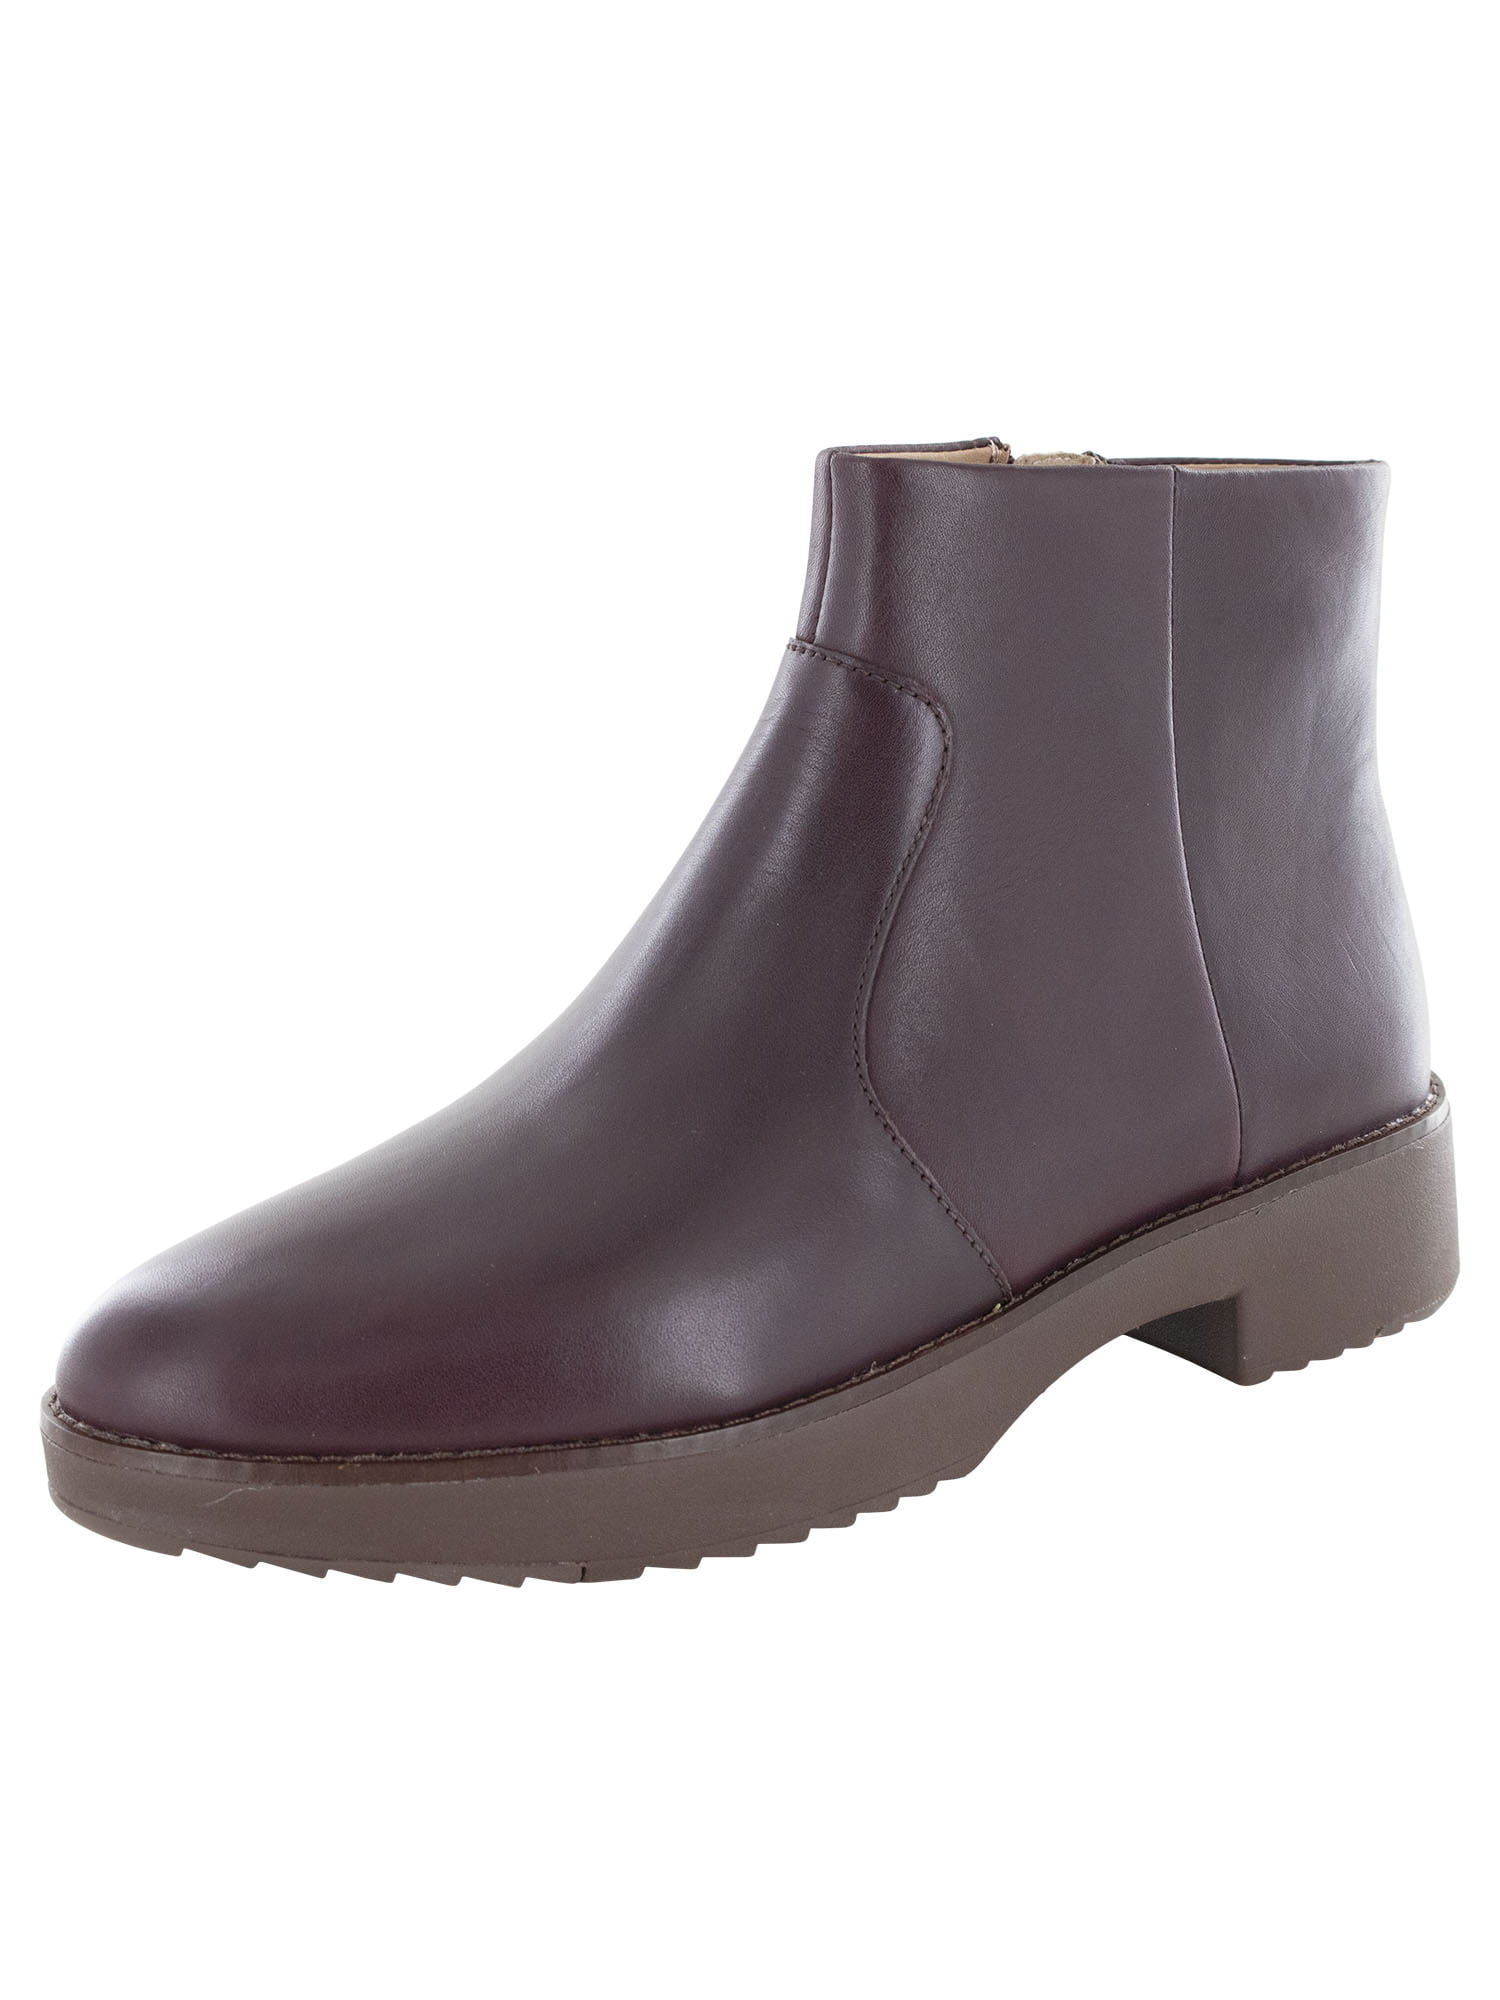 Womens Leather Ankle Boot Shoes, Lingonberry, US 5 - Walmart.com